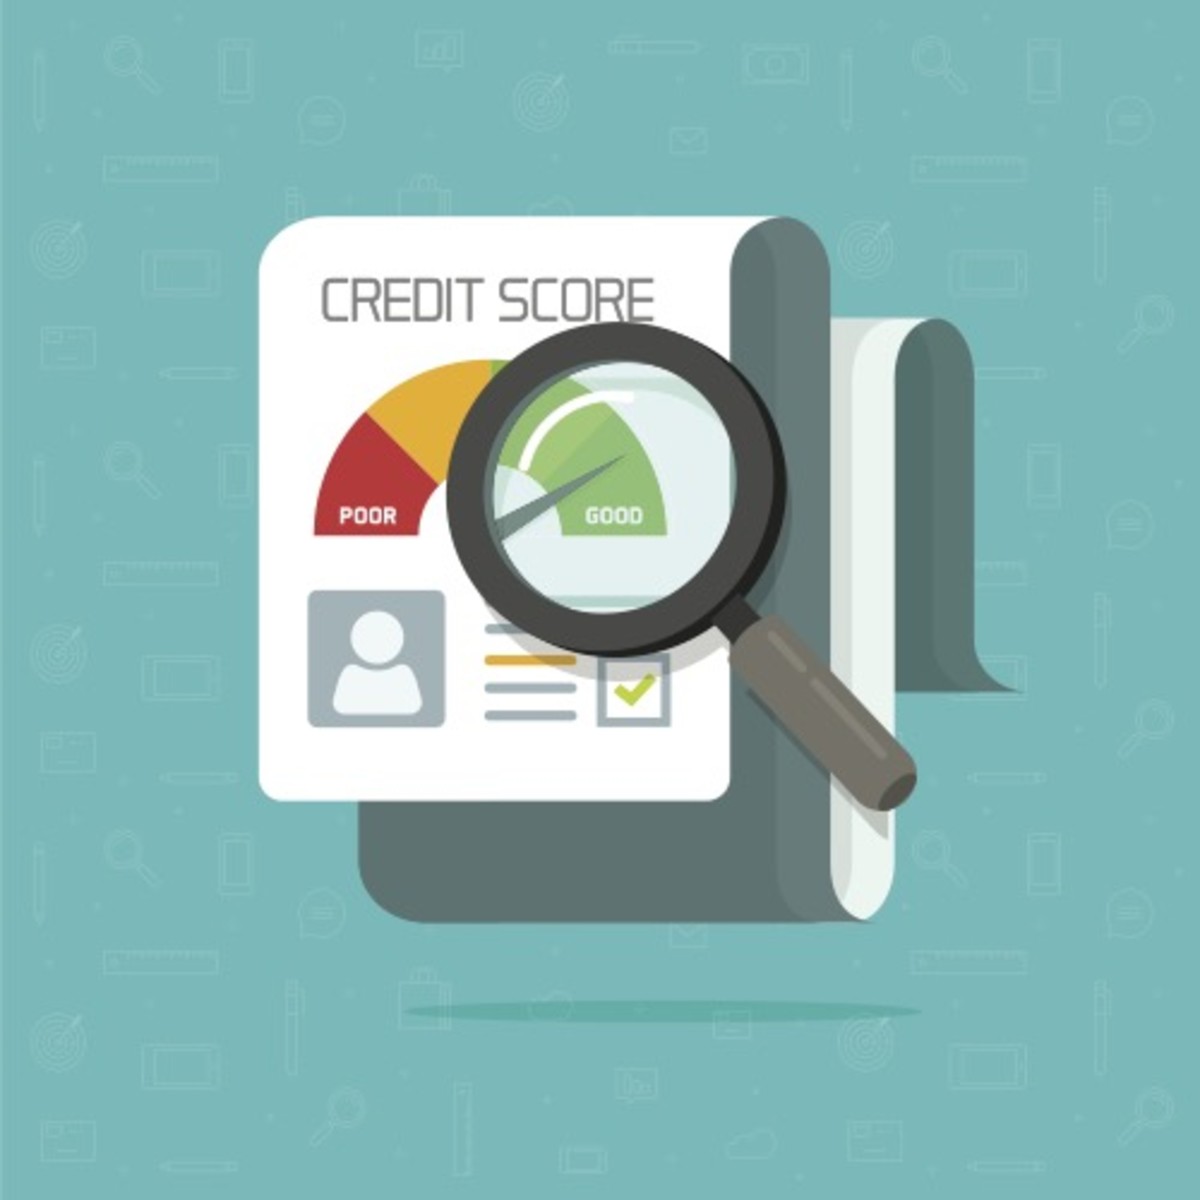 Credit Score Meaning